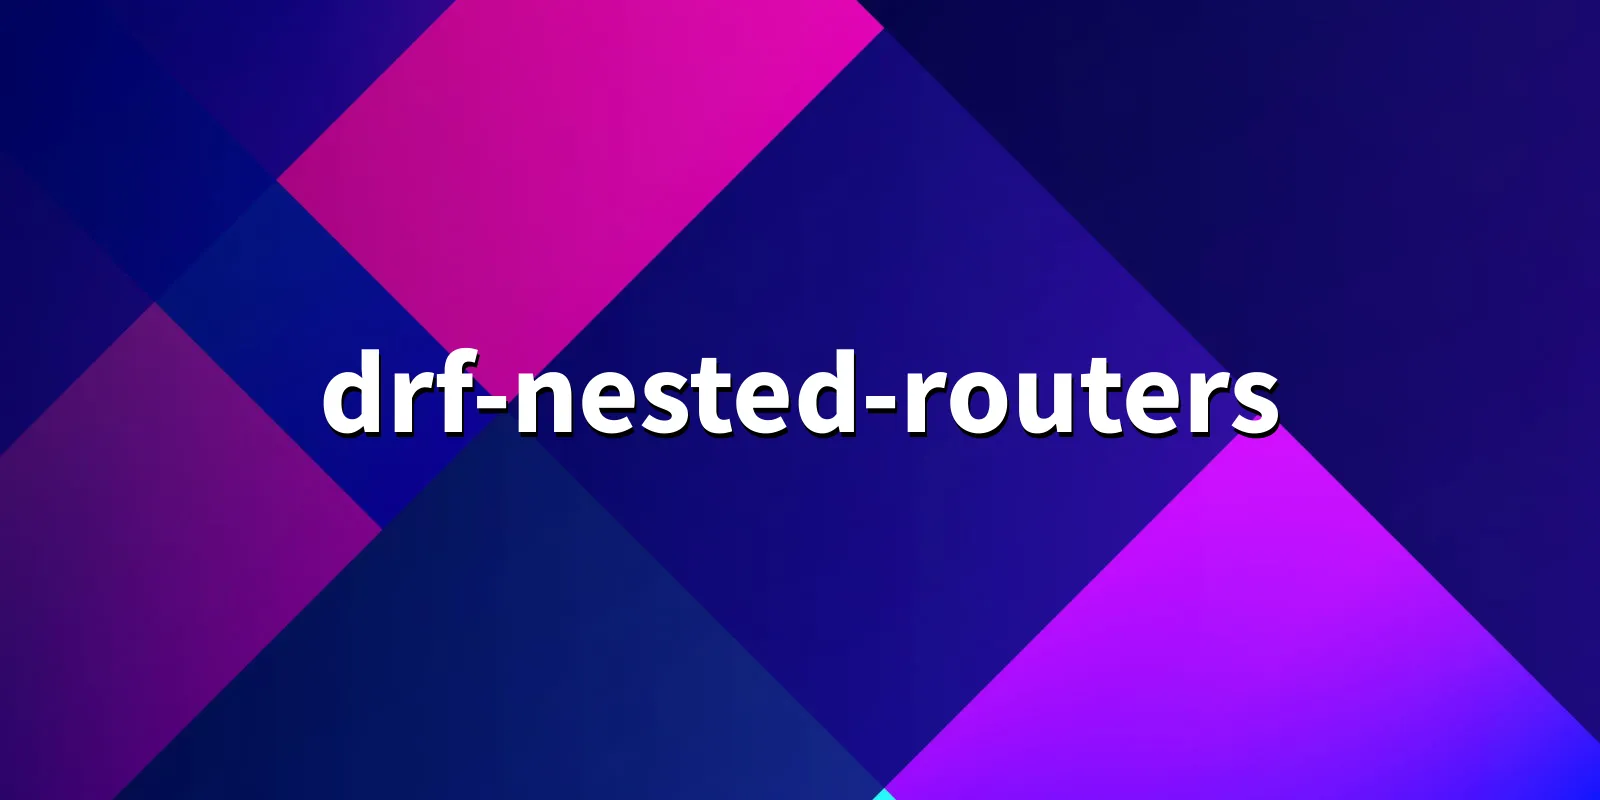 /pkg/d/drf-nested-routers/drf-nested-routers-banner.webp